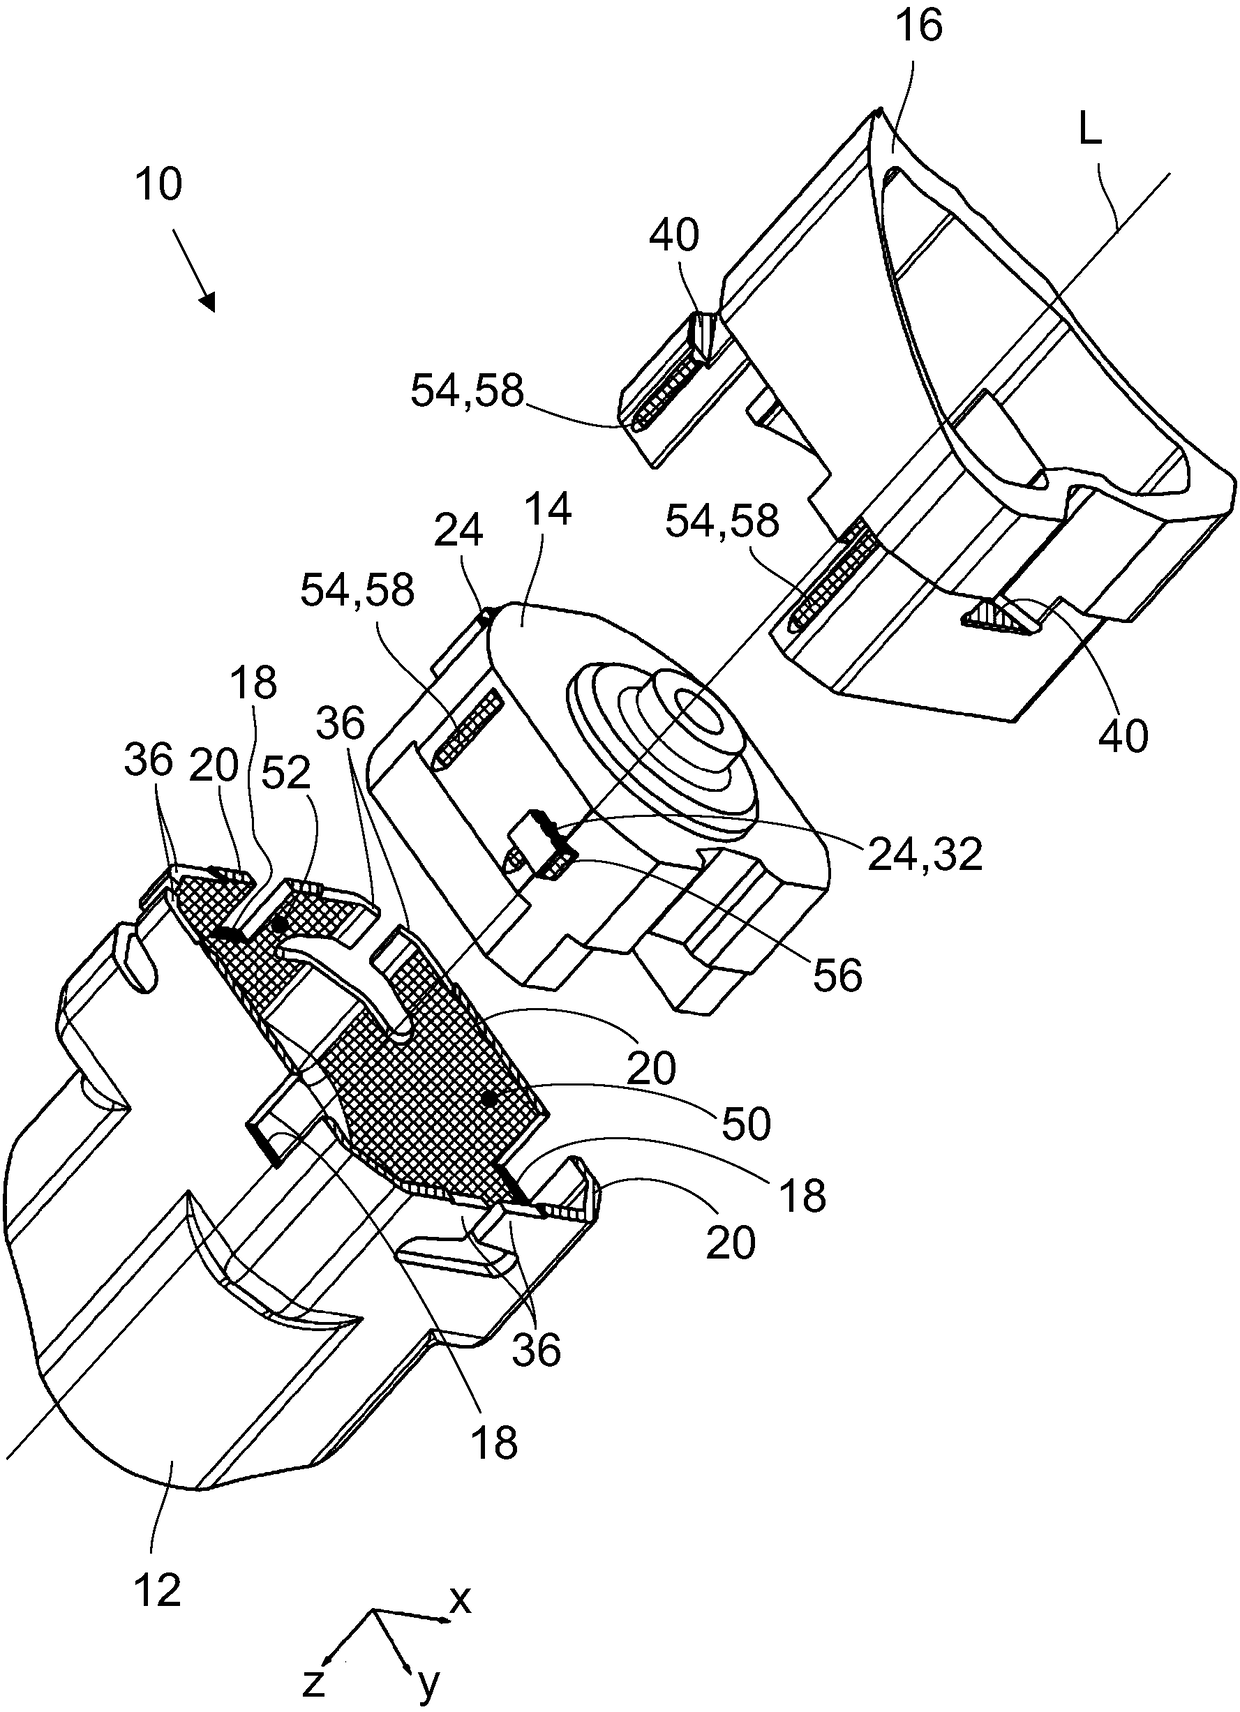 Motor-transmission connection assembly, particularly for use in motor vehicles